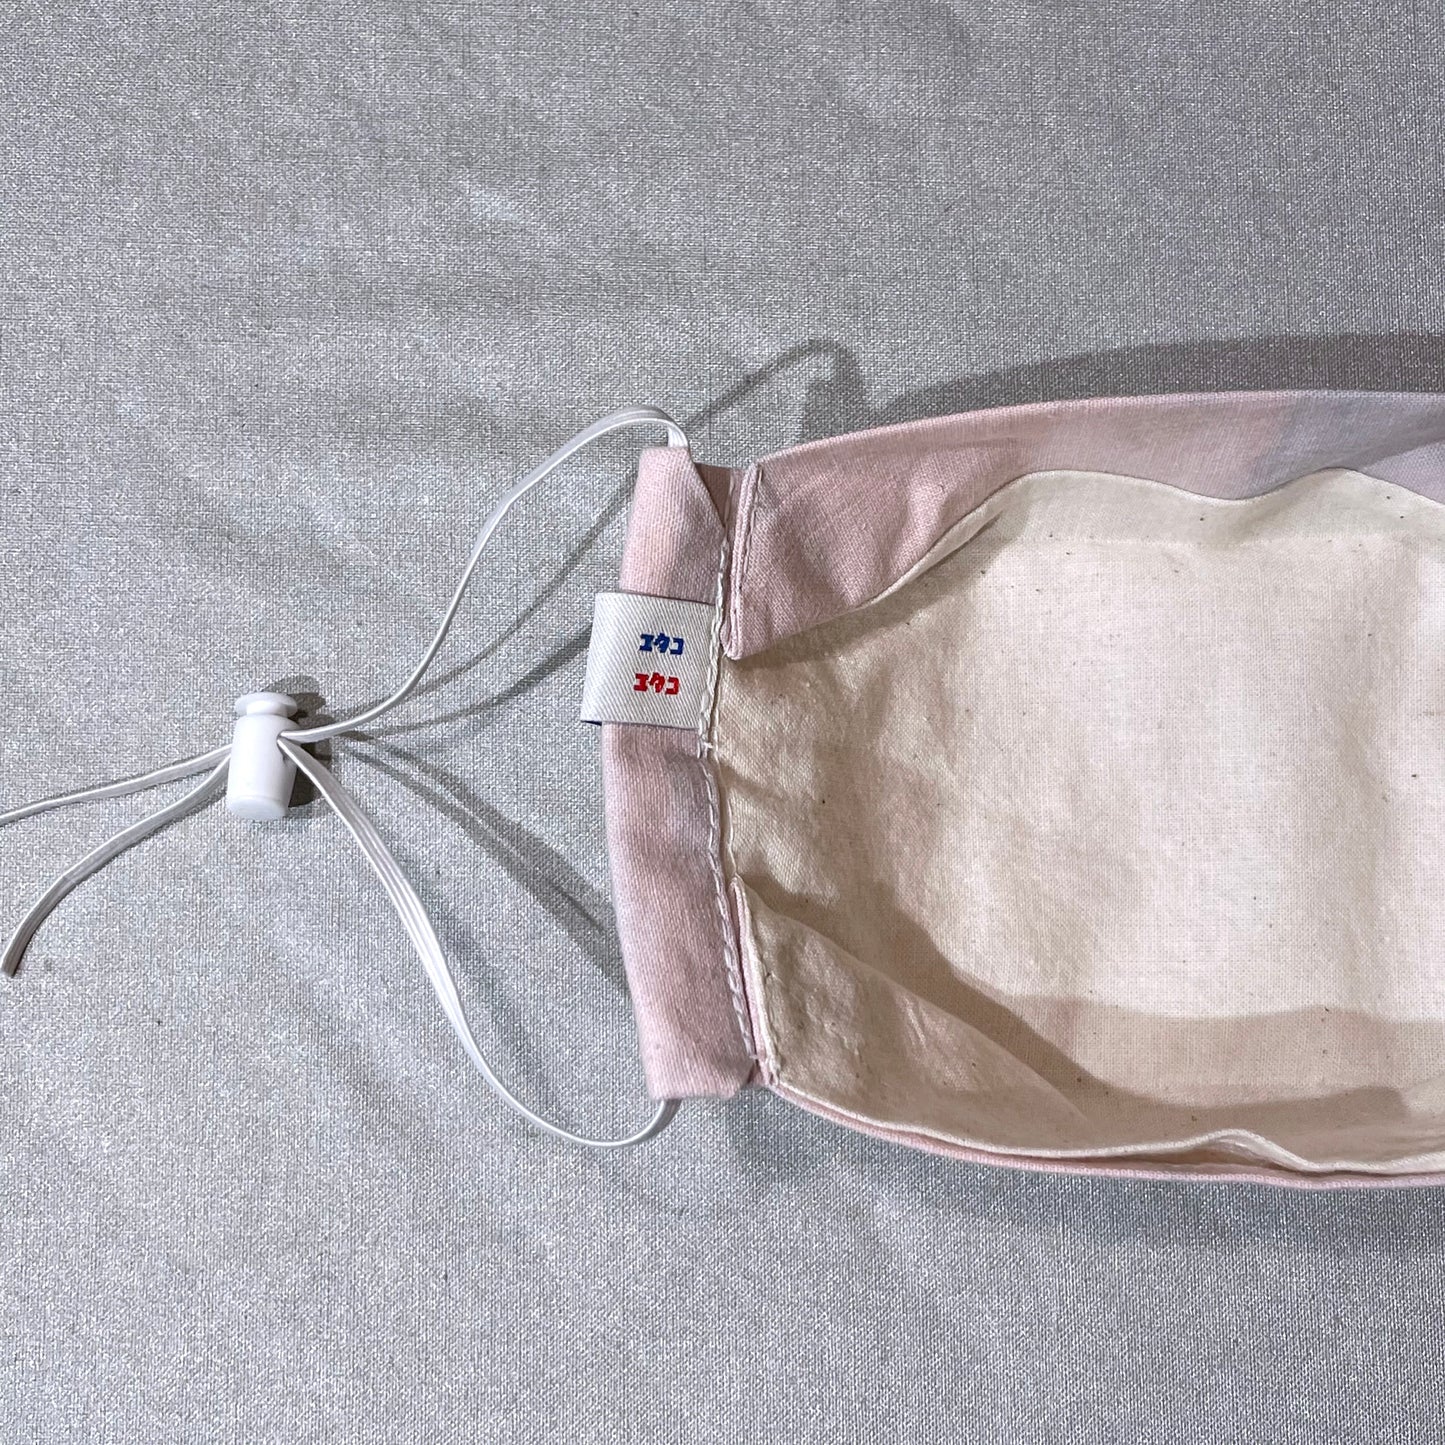 Cotton Face Mask - Vintage Pink Fabric